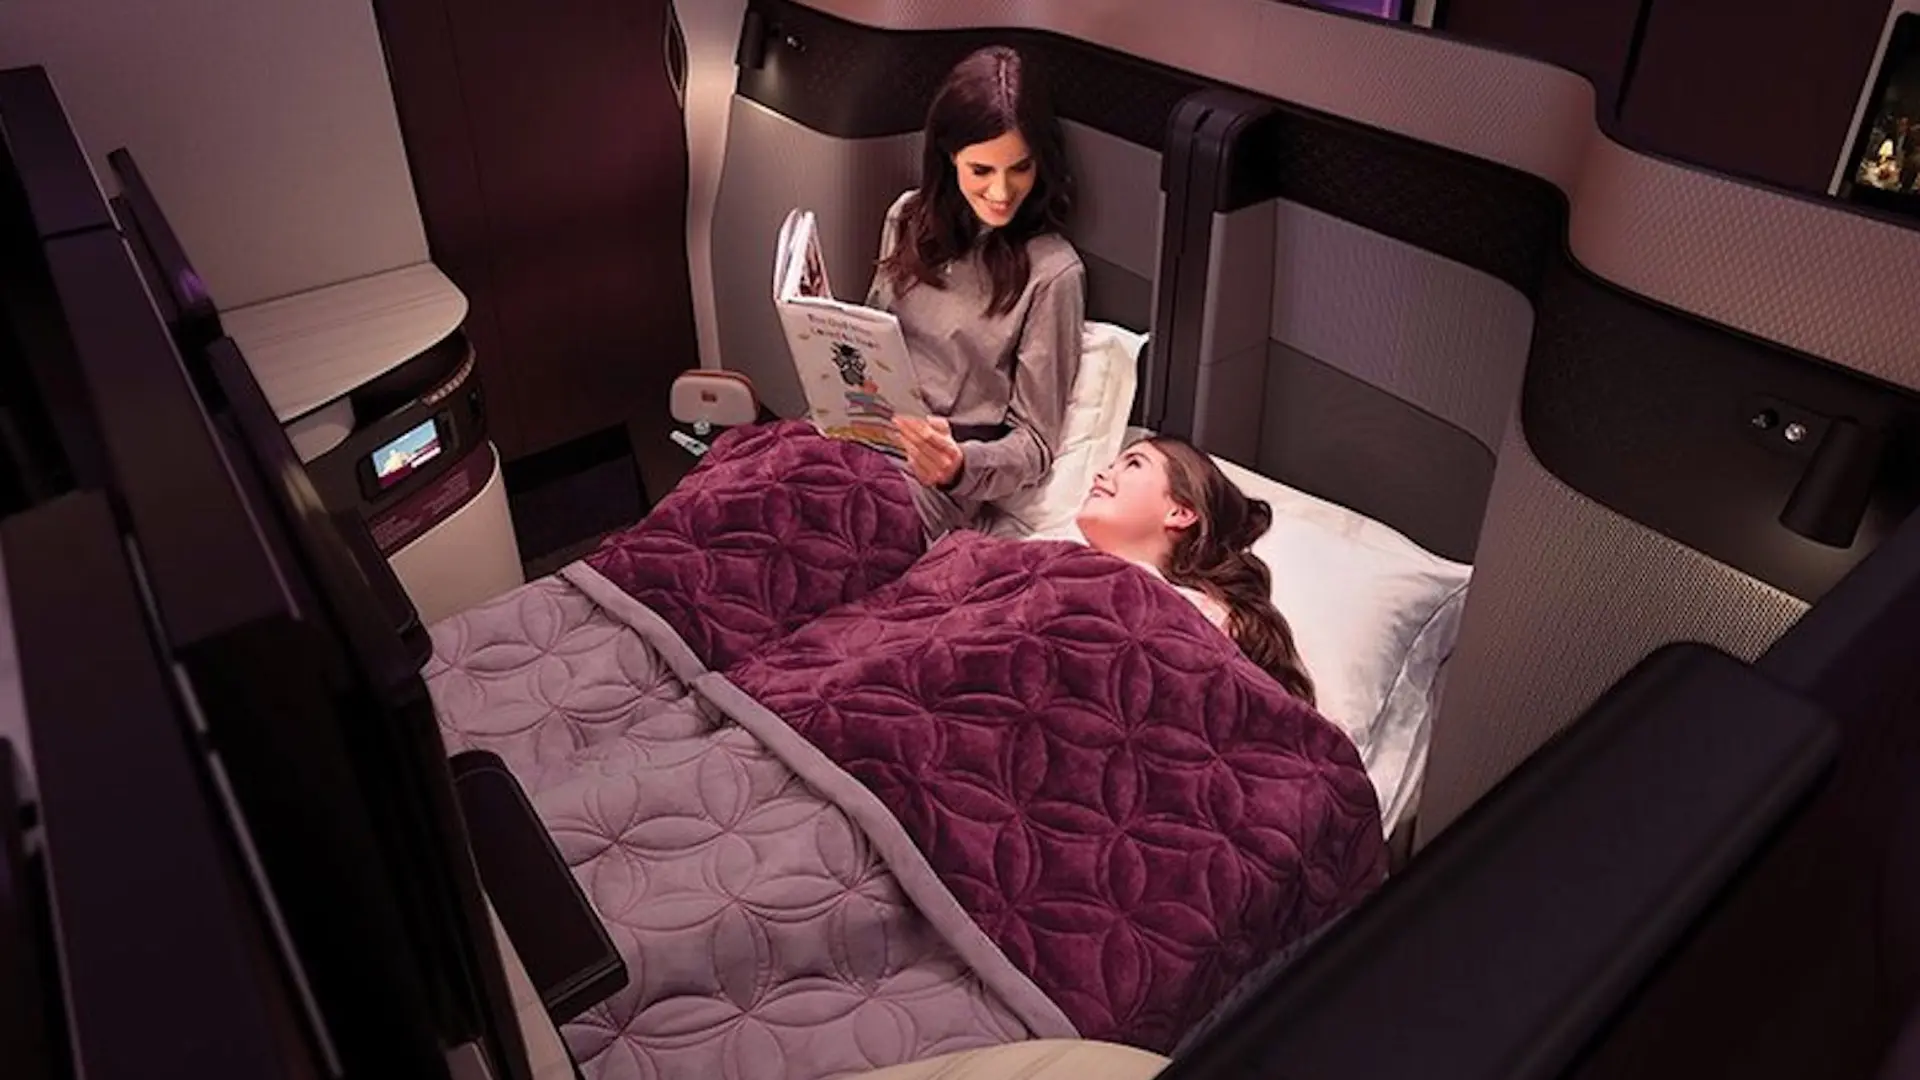 Happy woman and her daughter getting ready for sleep at a businessclass flight with a purple carpet over them.